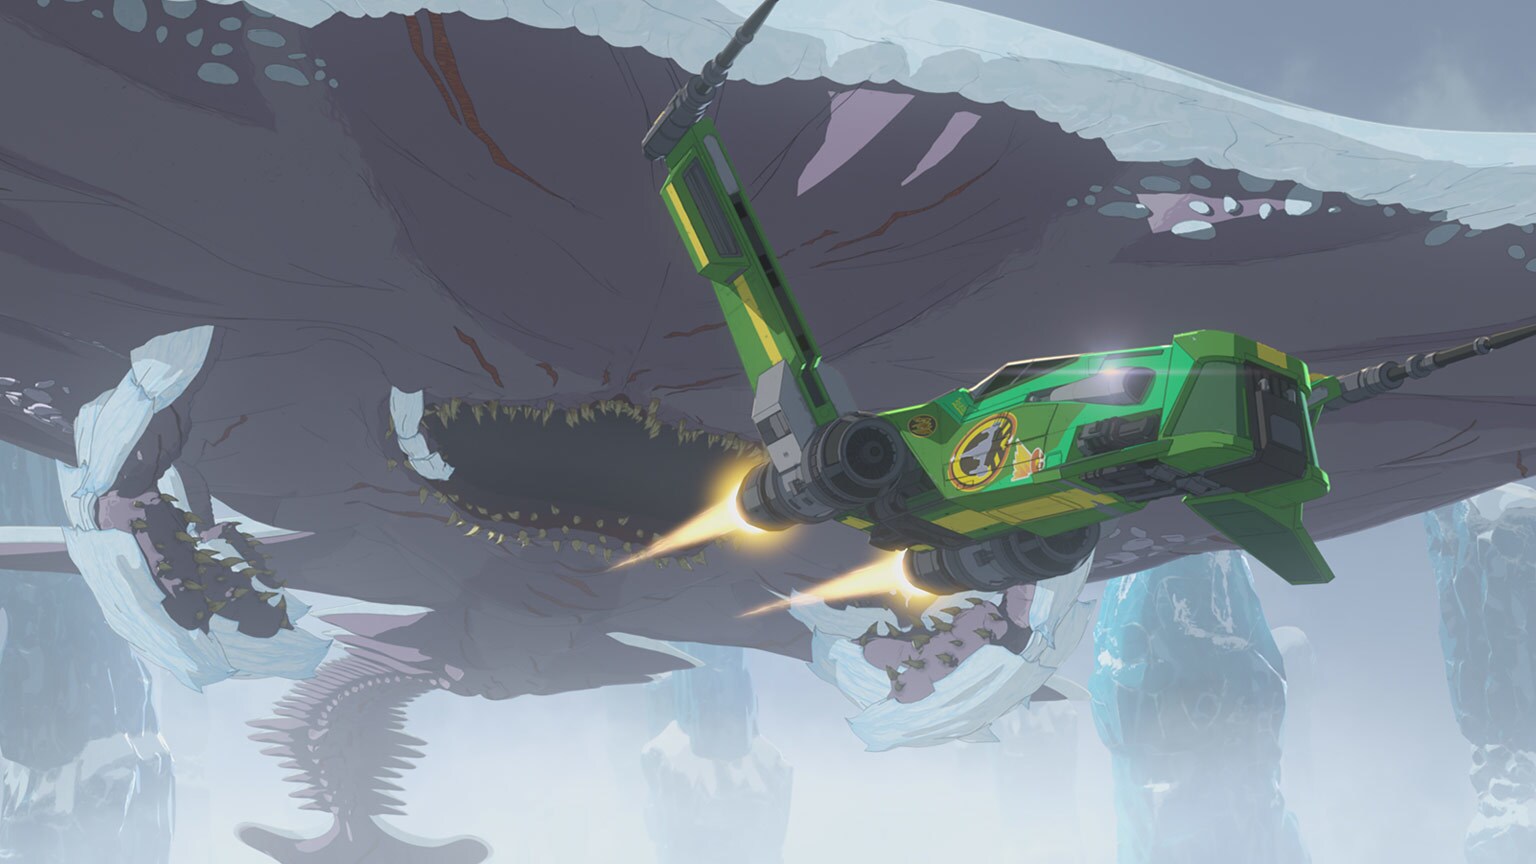 Bucket's List Extra: 7 Fun Facts from "Live Fire" - Star Wars Resistance